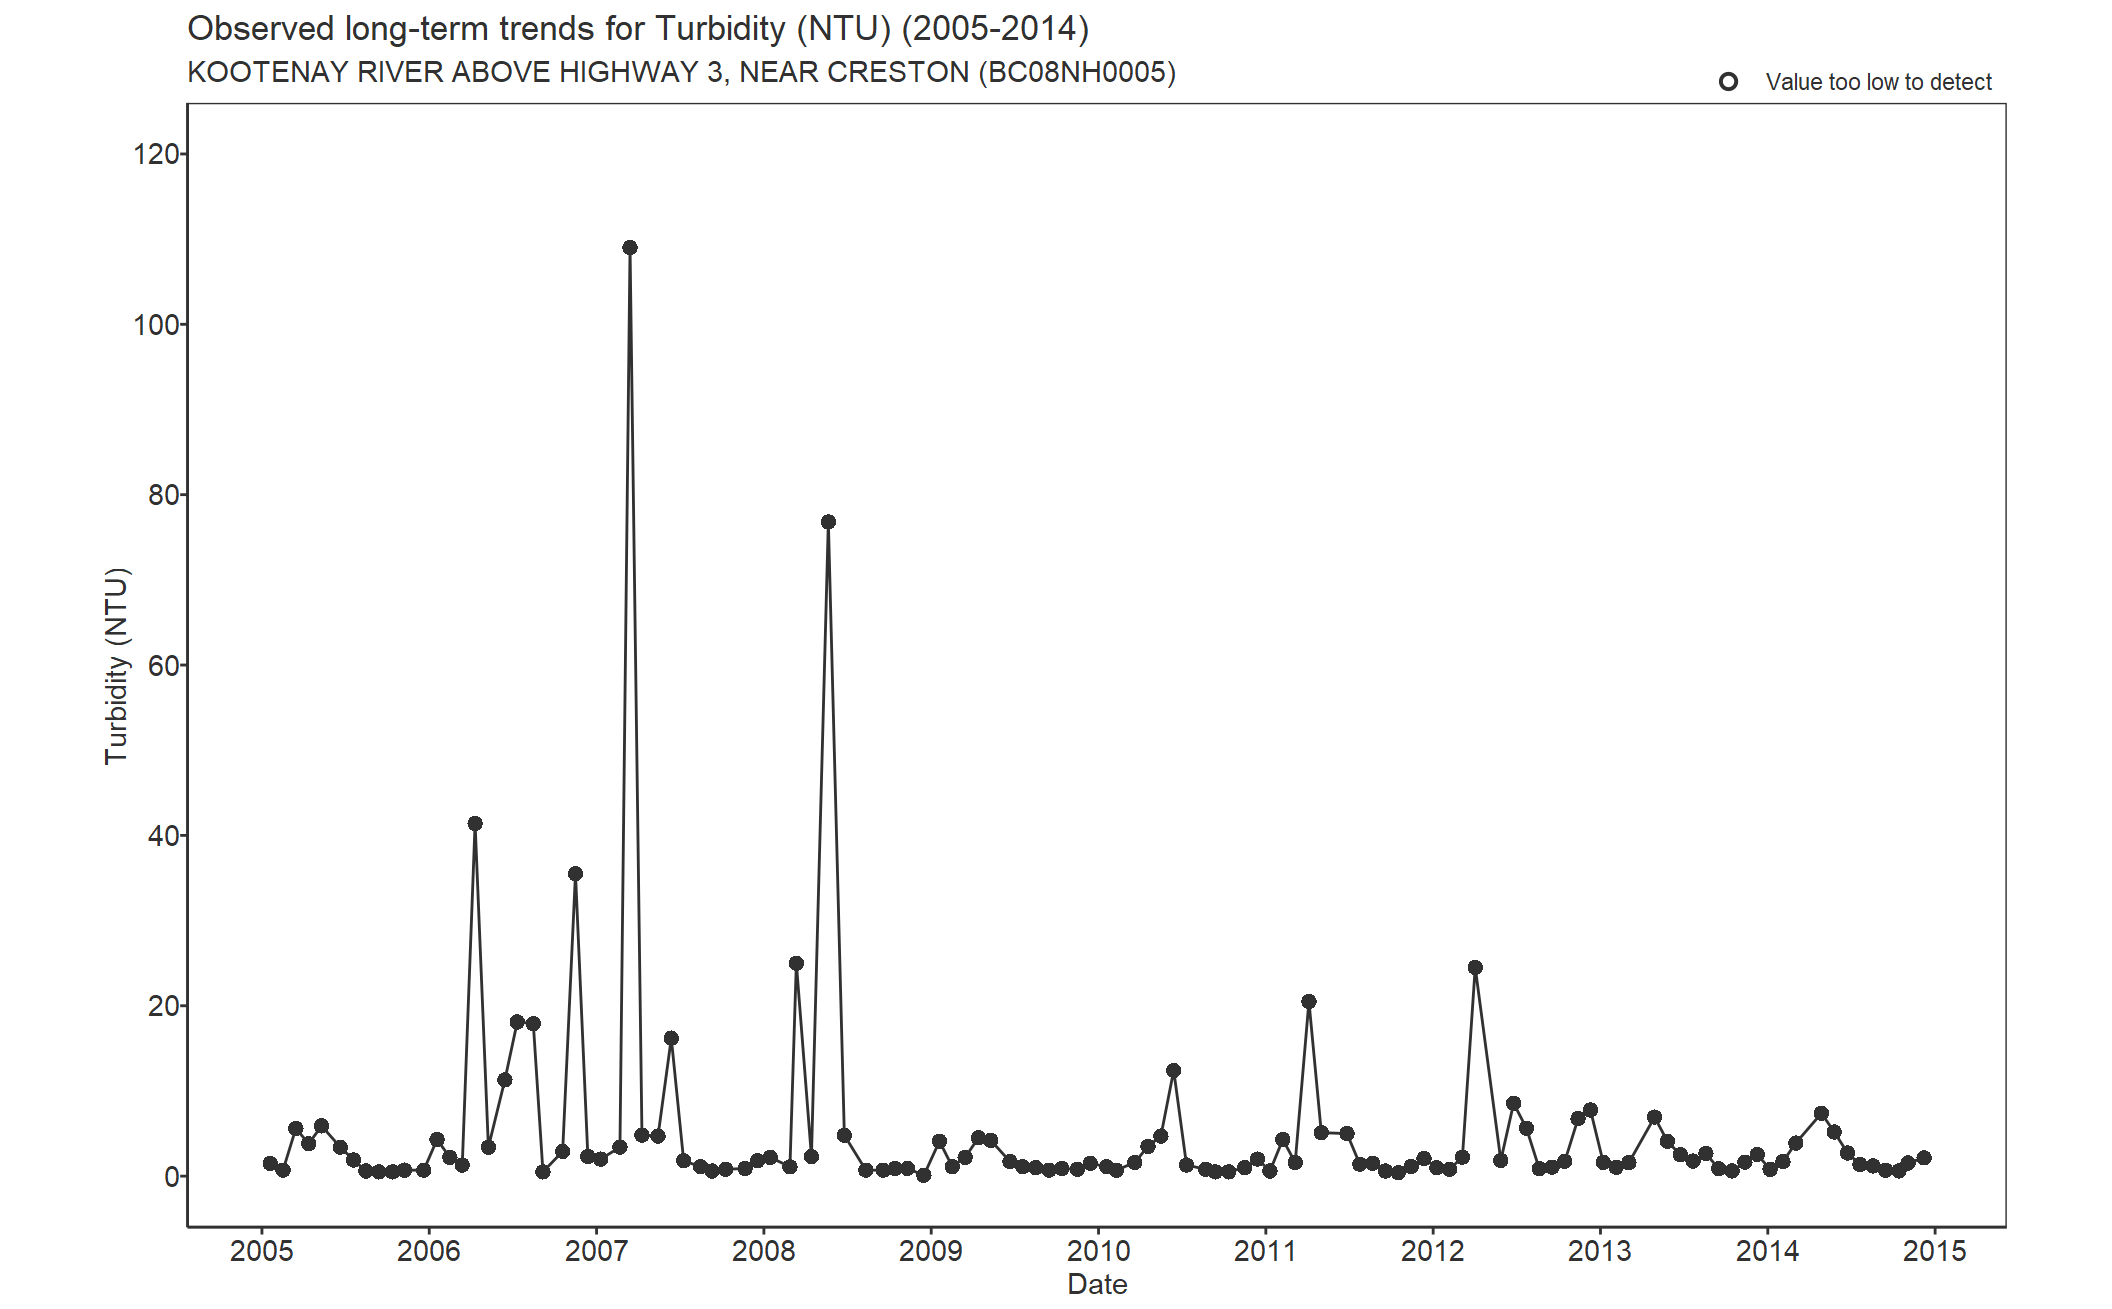 Observed long-term trends for Turbidity (2005-2014)